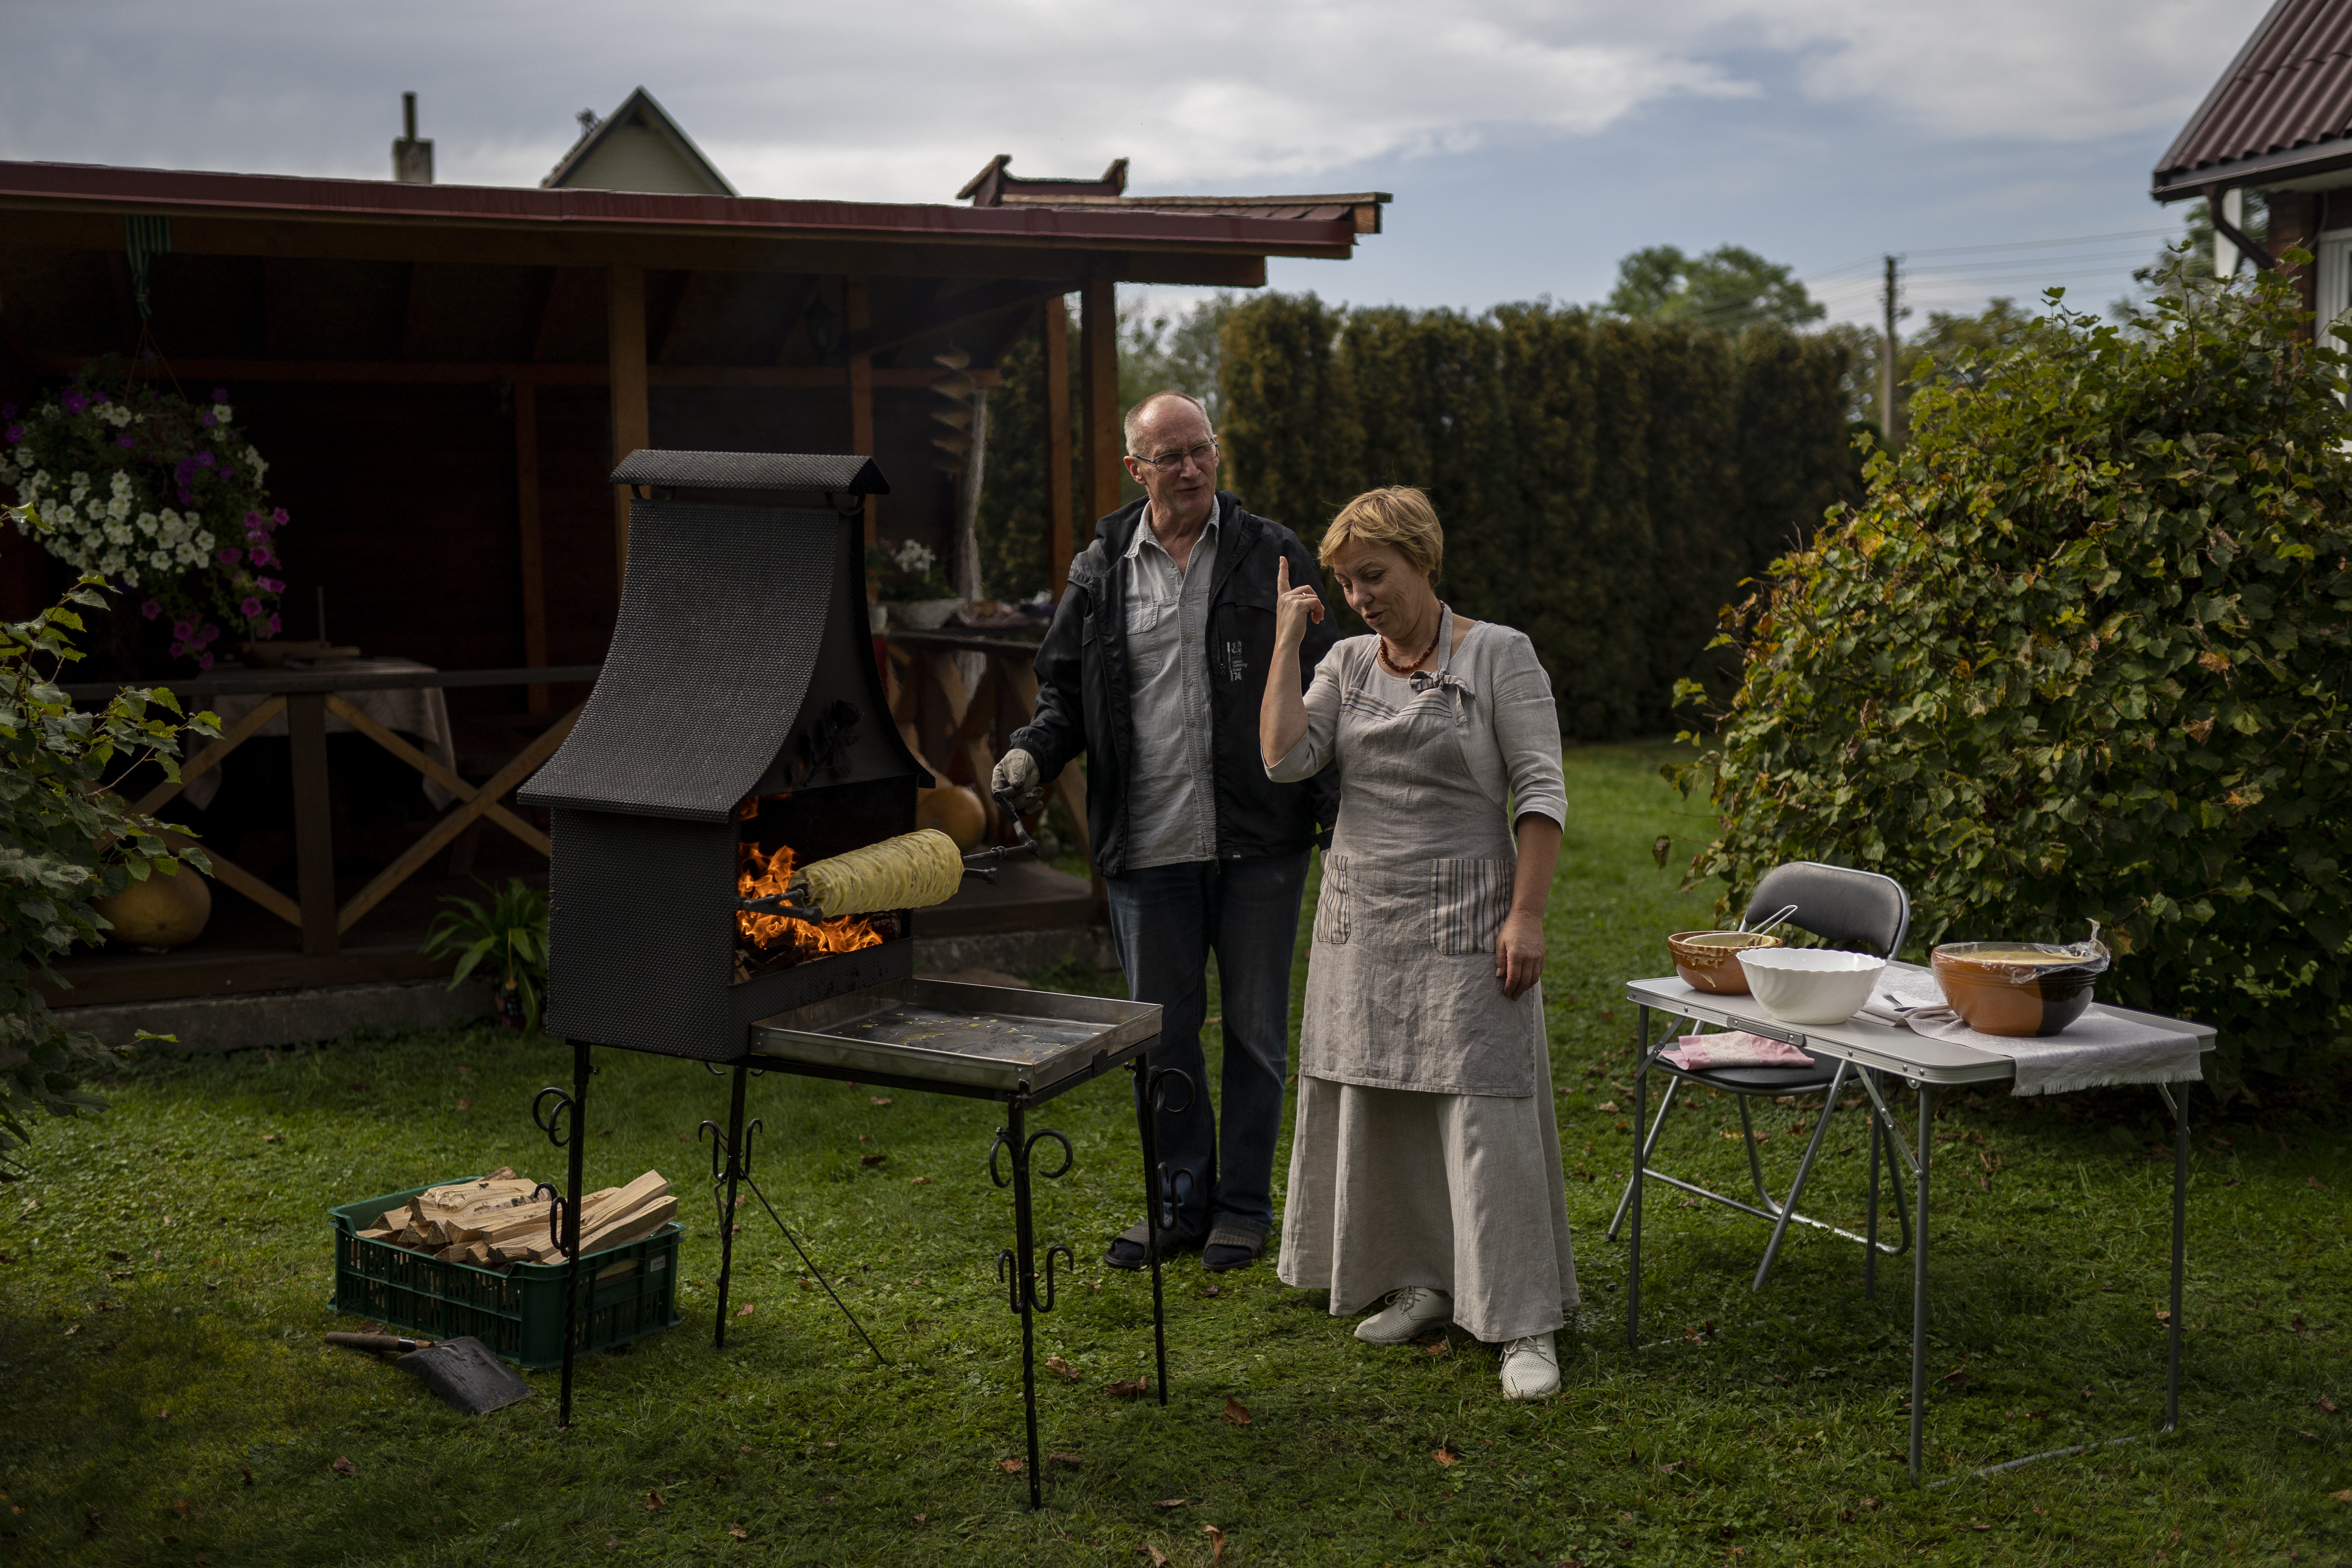 Ona and her husband speak about the chances of the rain picking up on a breezy day in Zūbiškės (AtlasNetwork.org Photo/Bernat Parera).